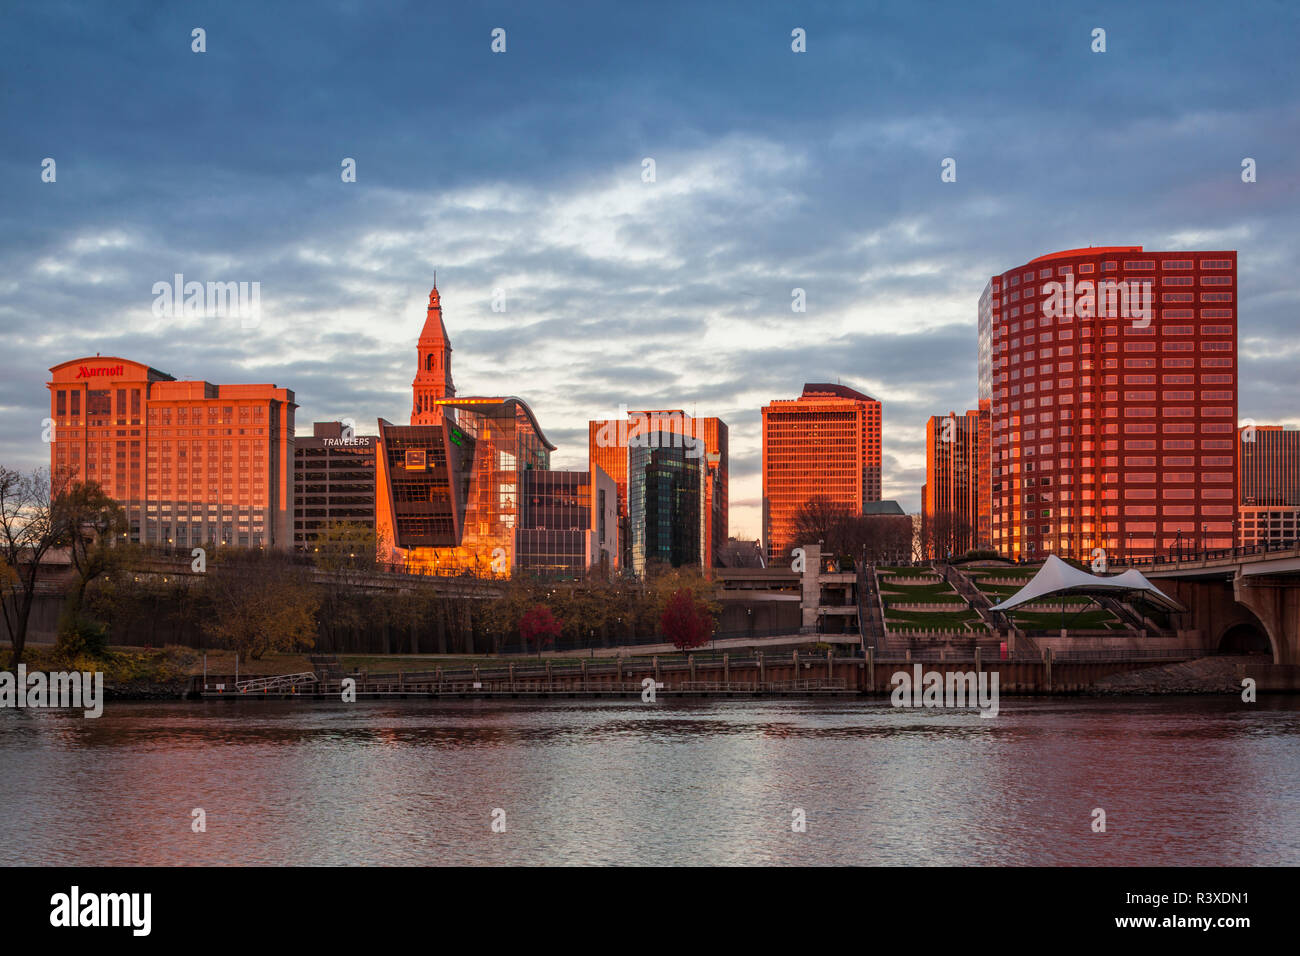 USA, Connecticut, Hartford, city skyline with Connecticut Science Center and Travelers Building, from the Connecticut River at dawn, autumn Stock Photo